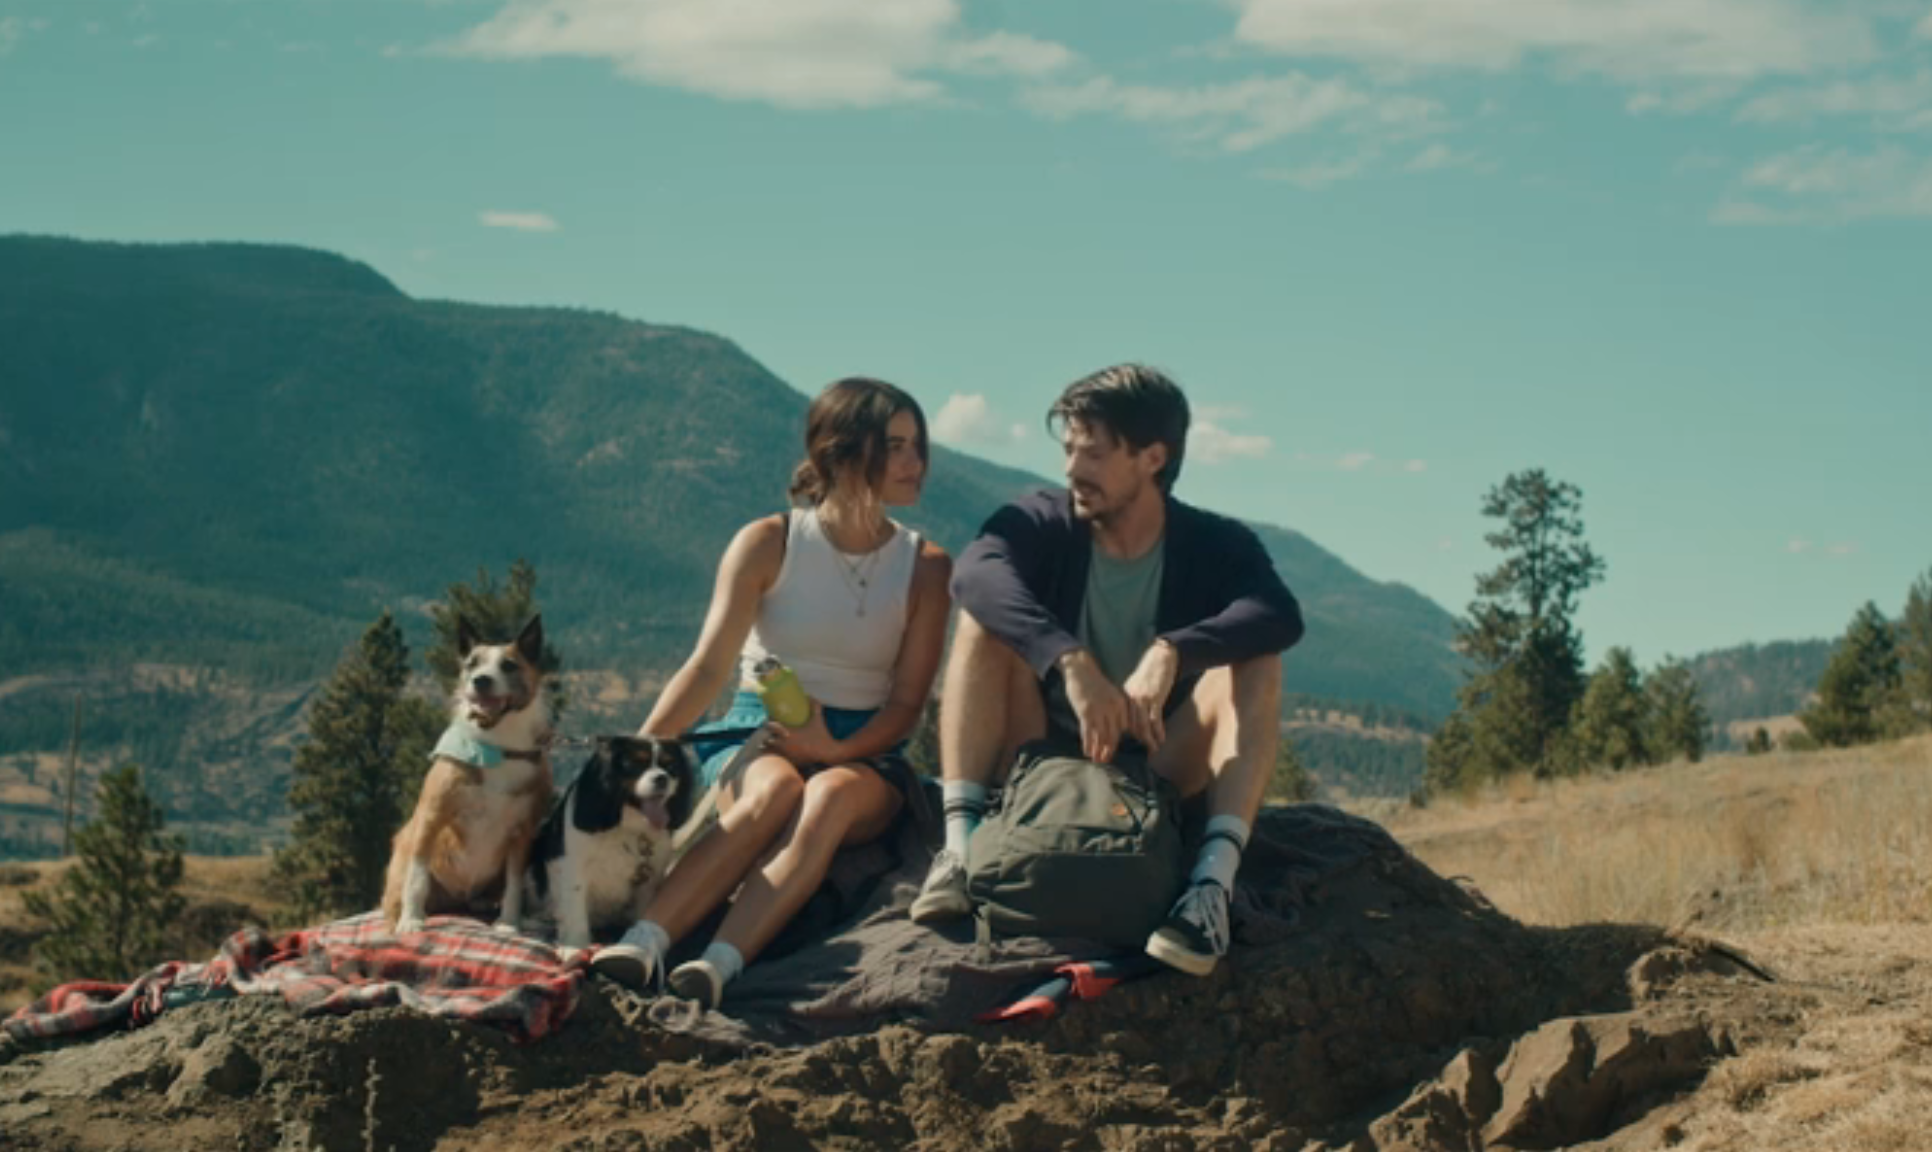 grant gustin and lucy hale having picnic with dogs at top of mountain